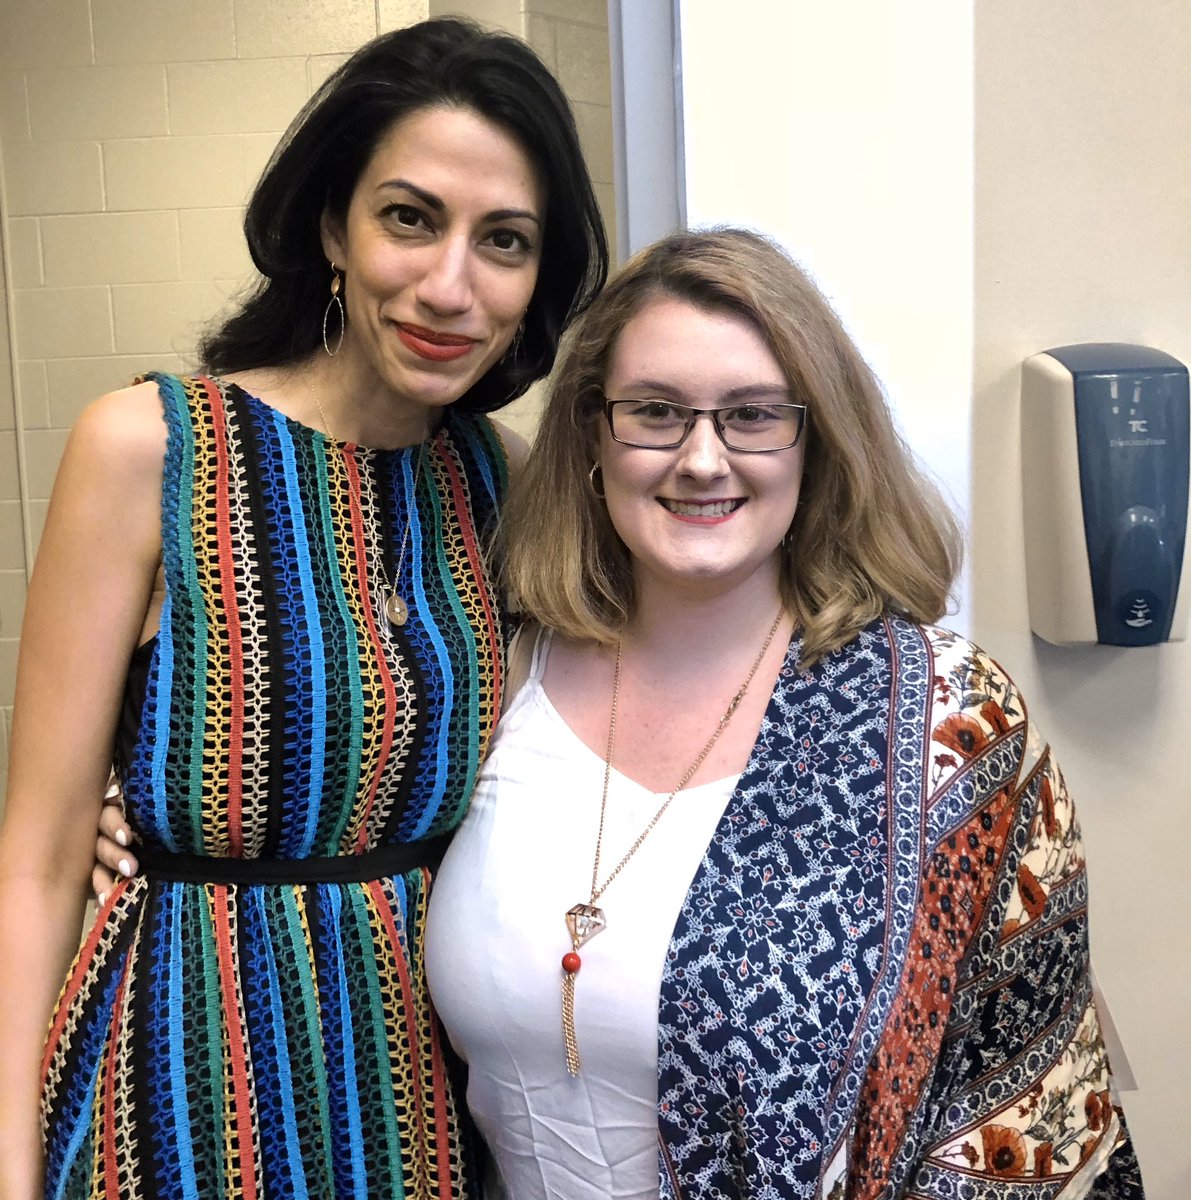 Day 14 late night update: someone was telling me to post a photo from one of my favorite memories, so here you go! Meeting Huma back in 2018 was truly a special moment! The rest of the day that came with it, was even better! I’m forever grateful for those moments. 